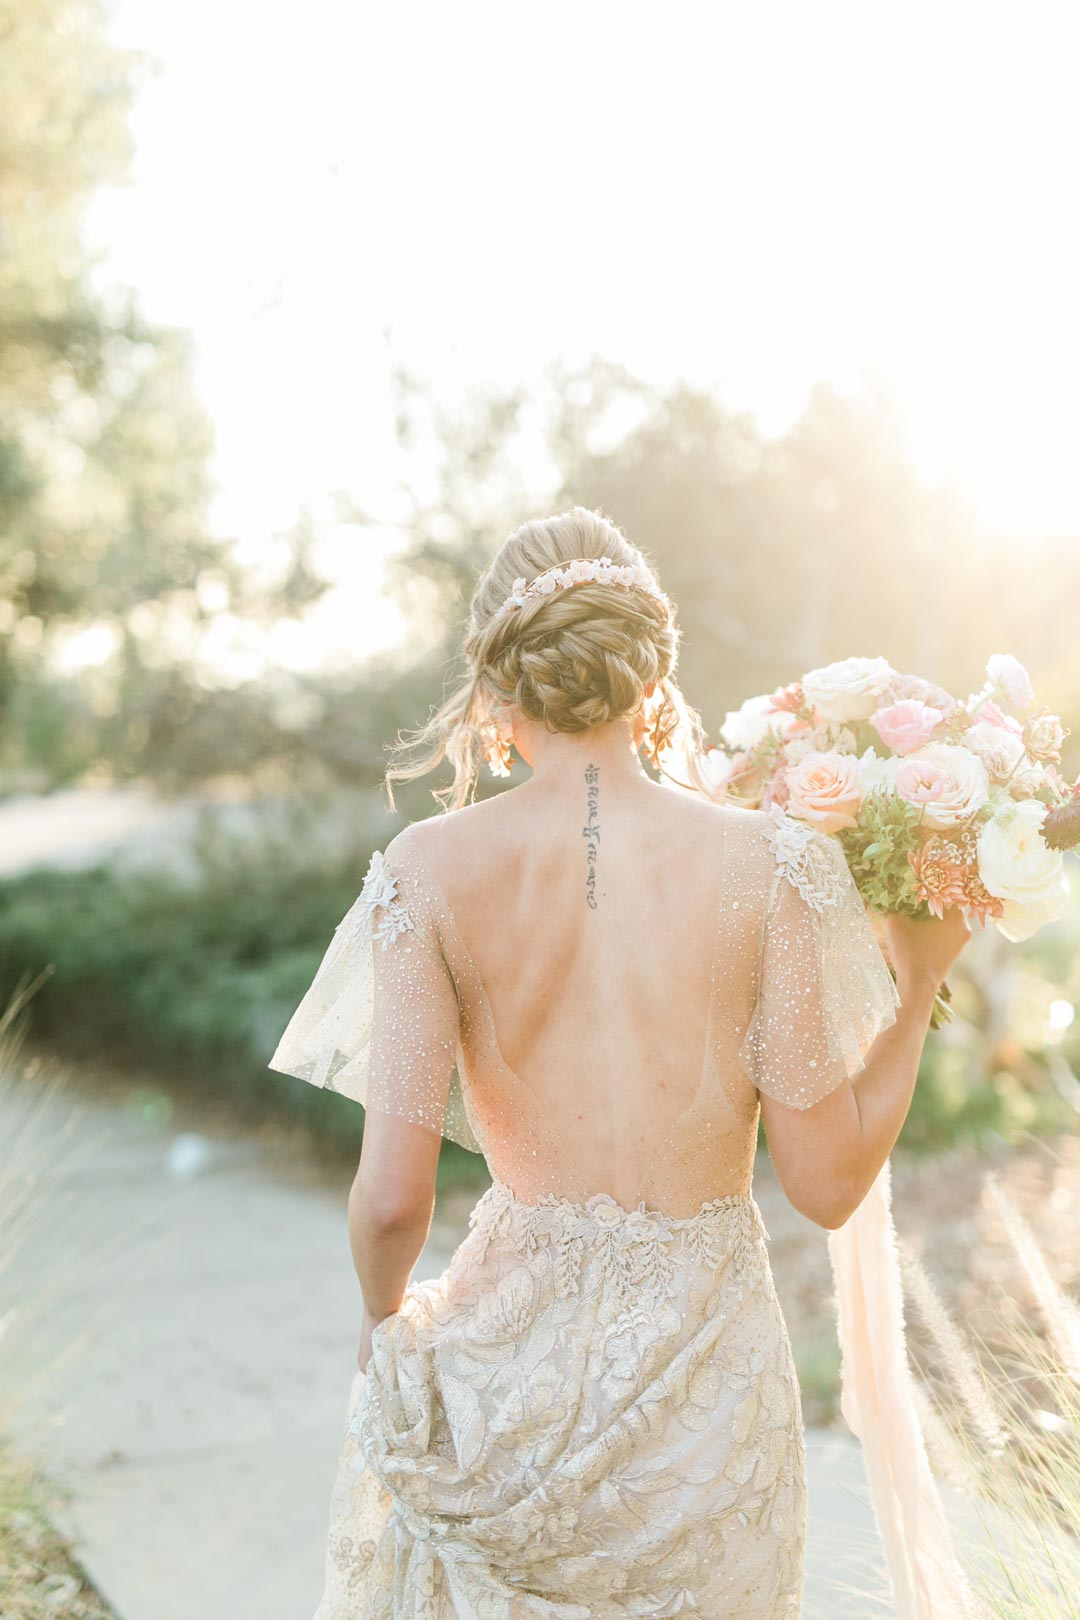 Soleil Gold Lace with Sparkle Wedding Dress by Claire Pettibone